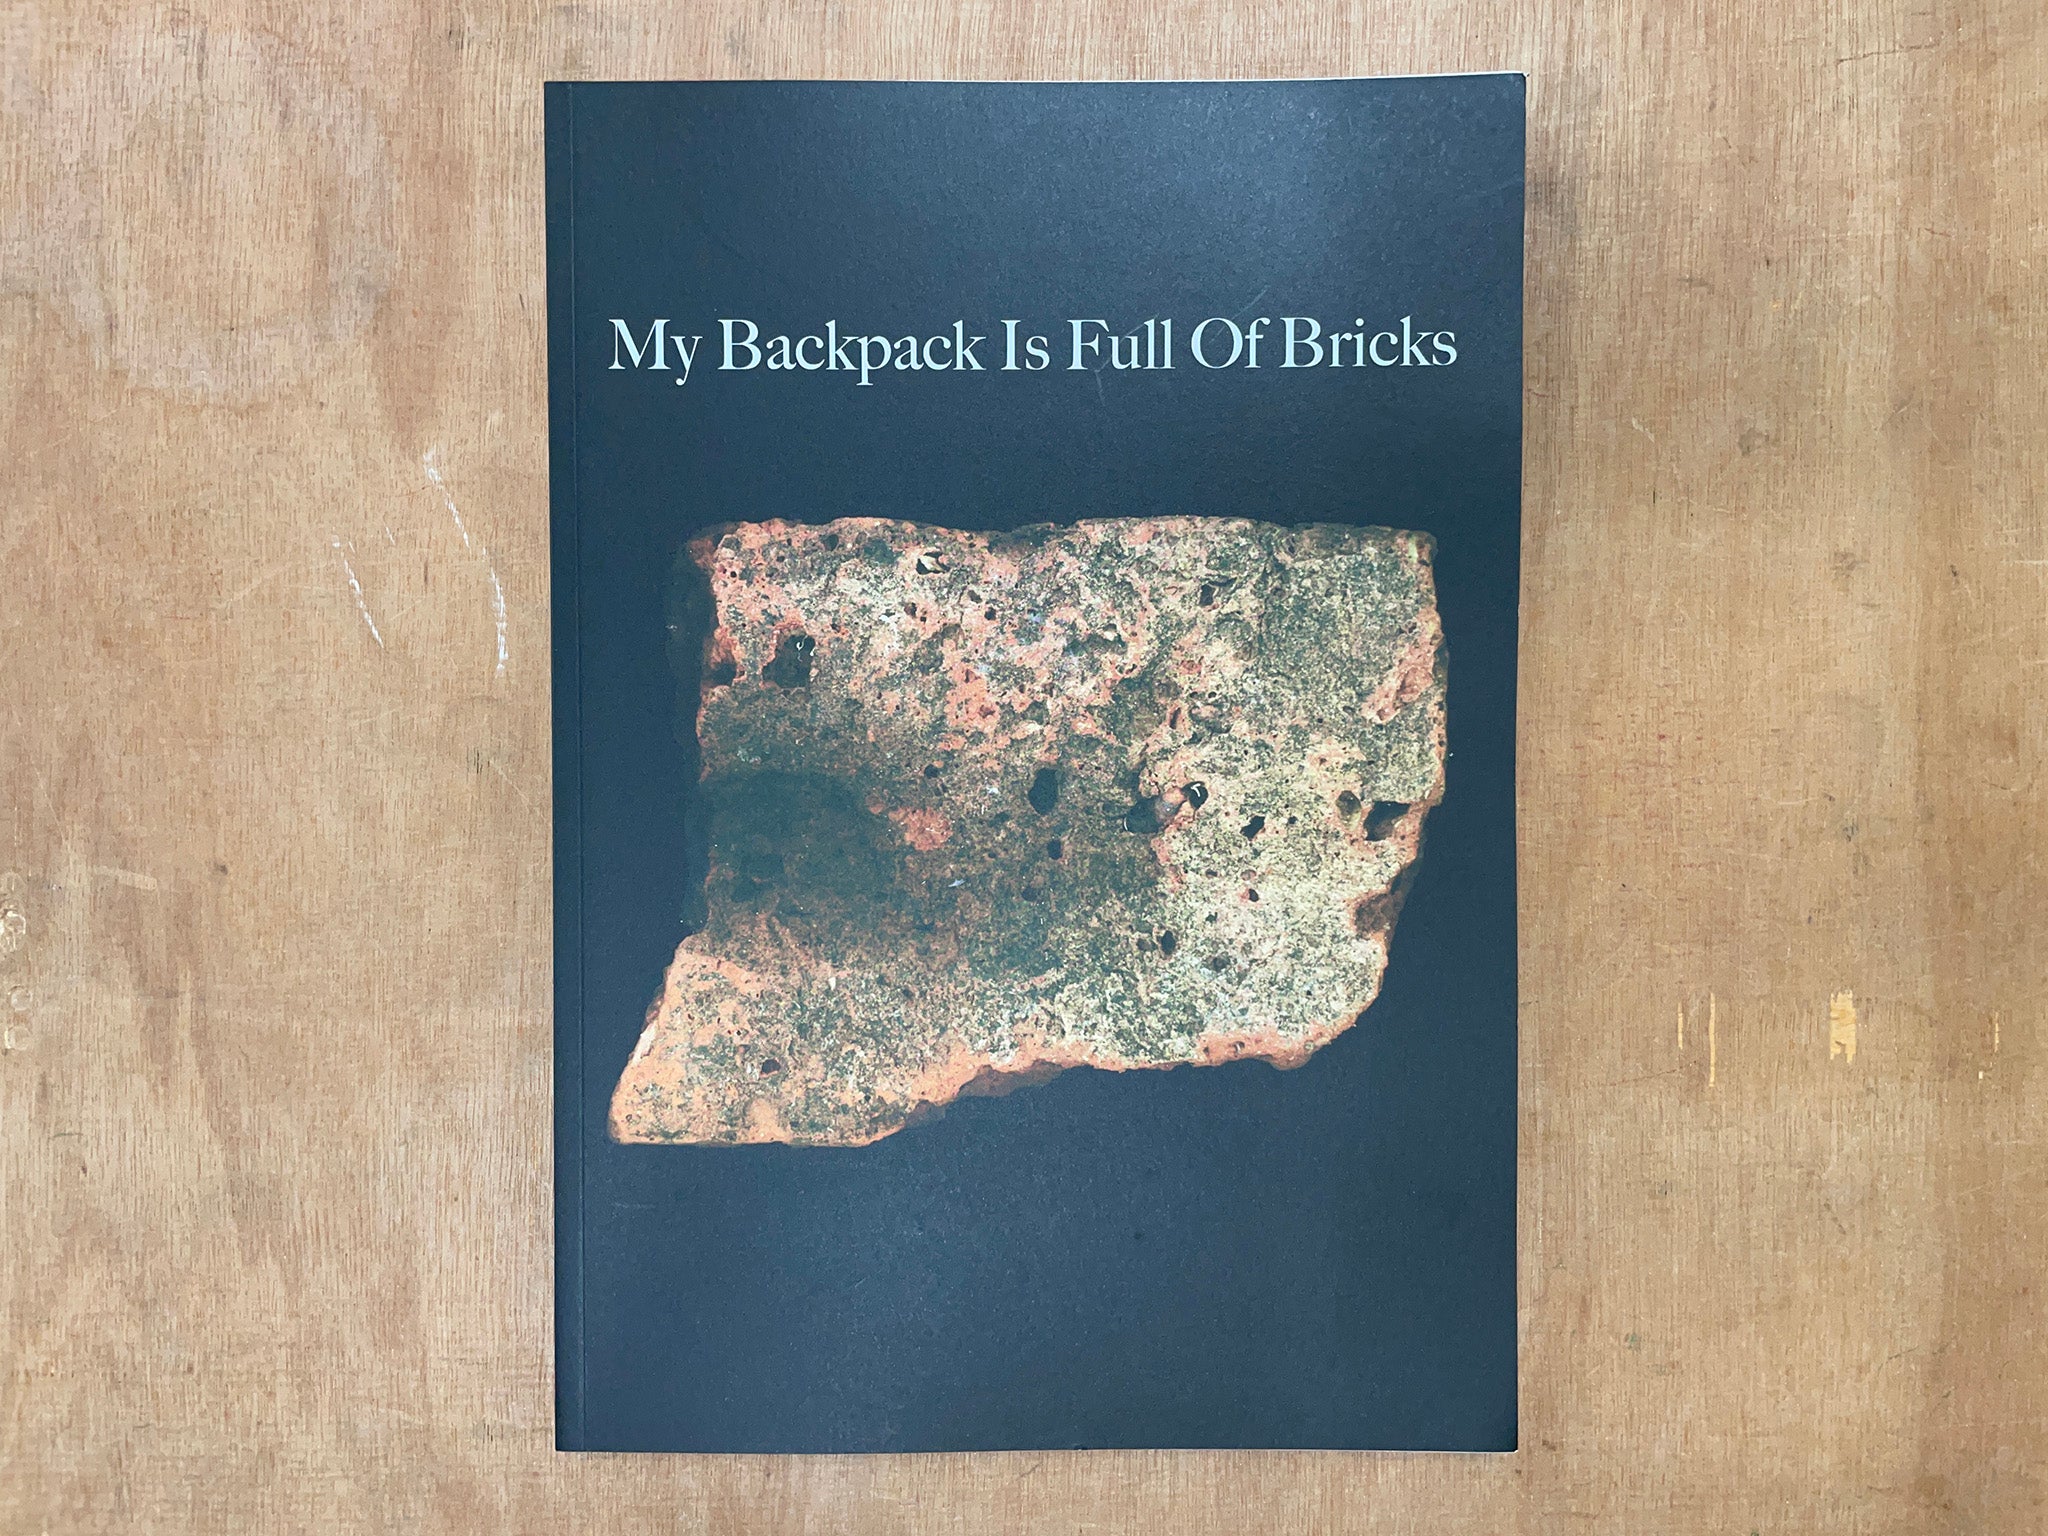 MY BACKPACK IS FULL OF BRICKS by Felix Clay